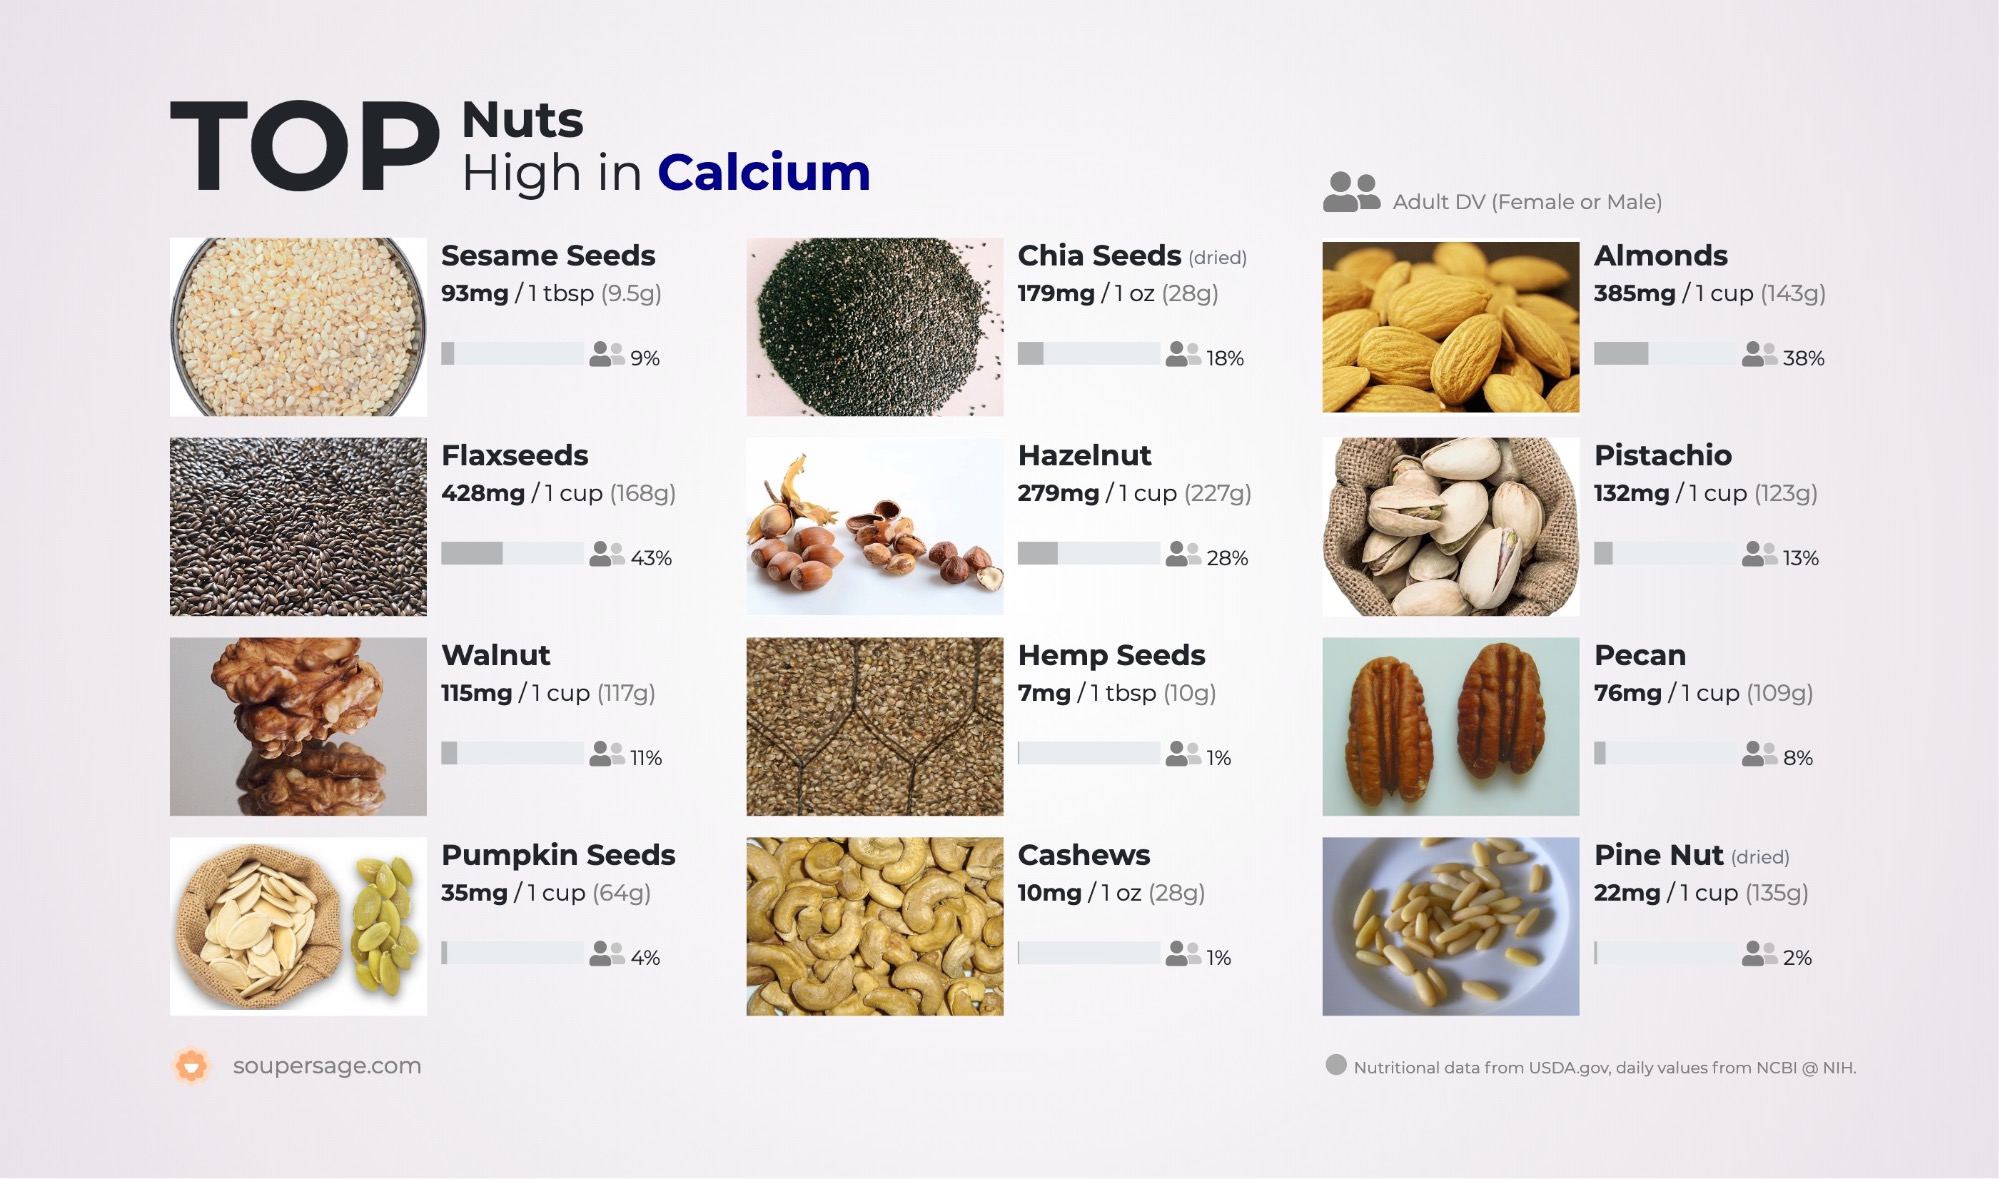 image of Top Nuts High in Calcium